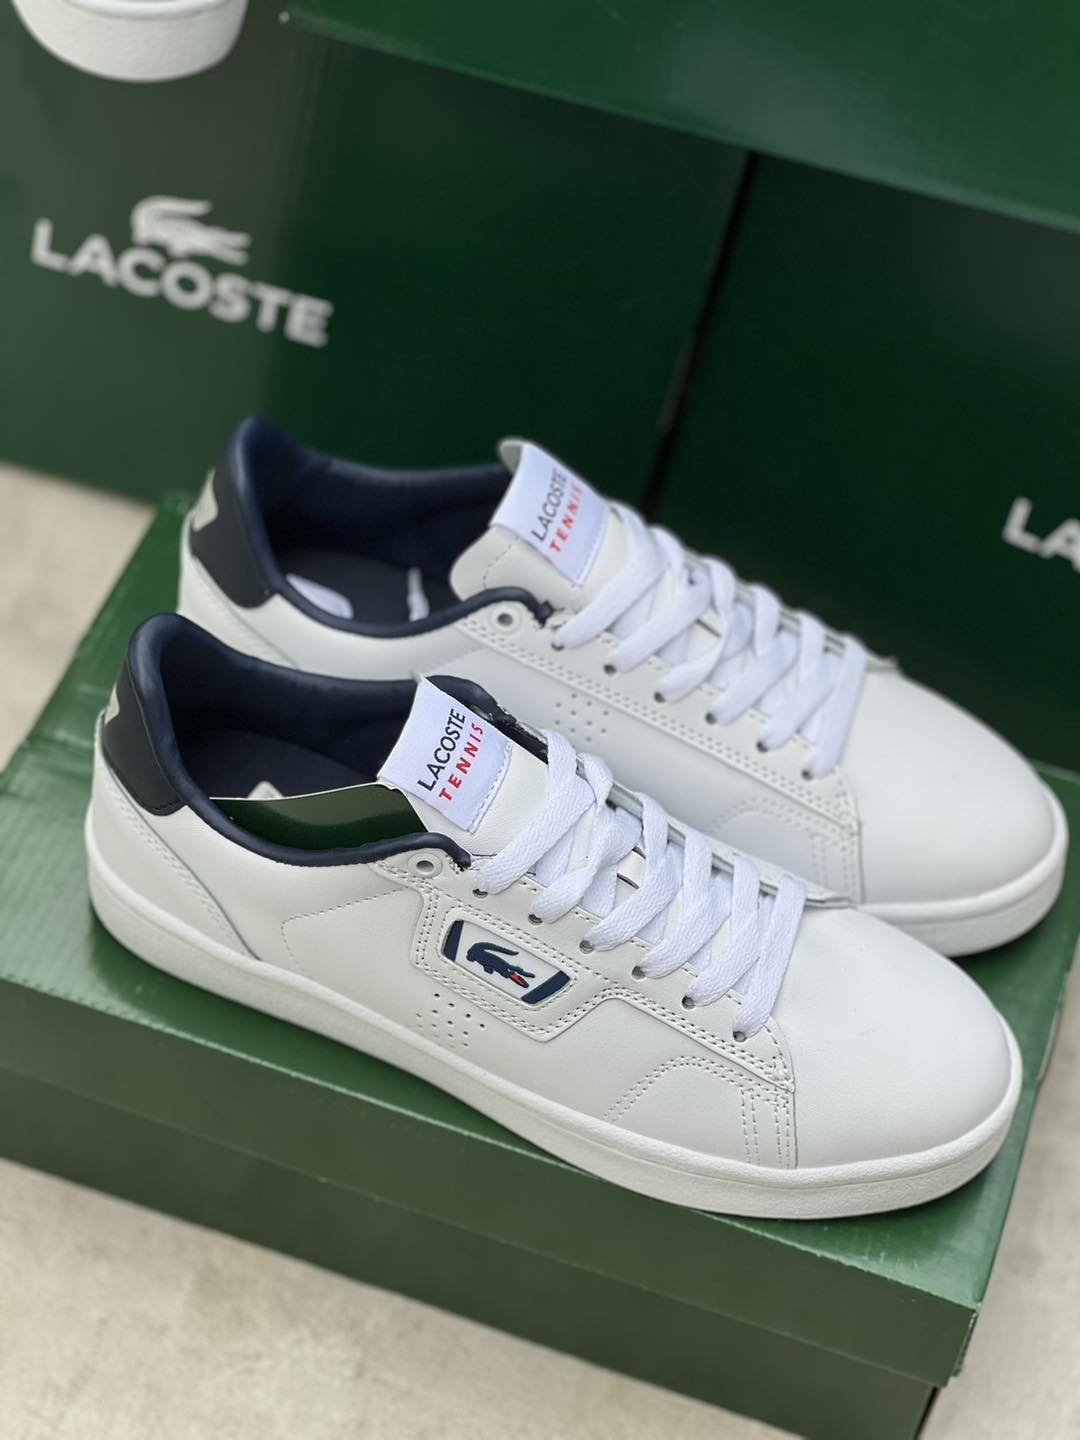 White & Navy Lacoste Shoes